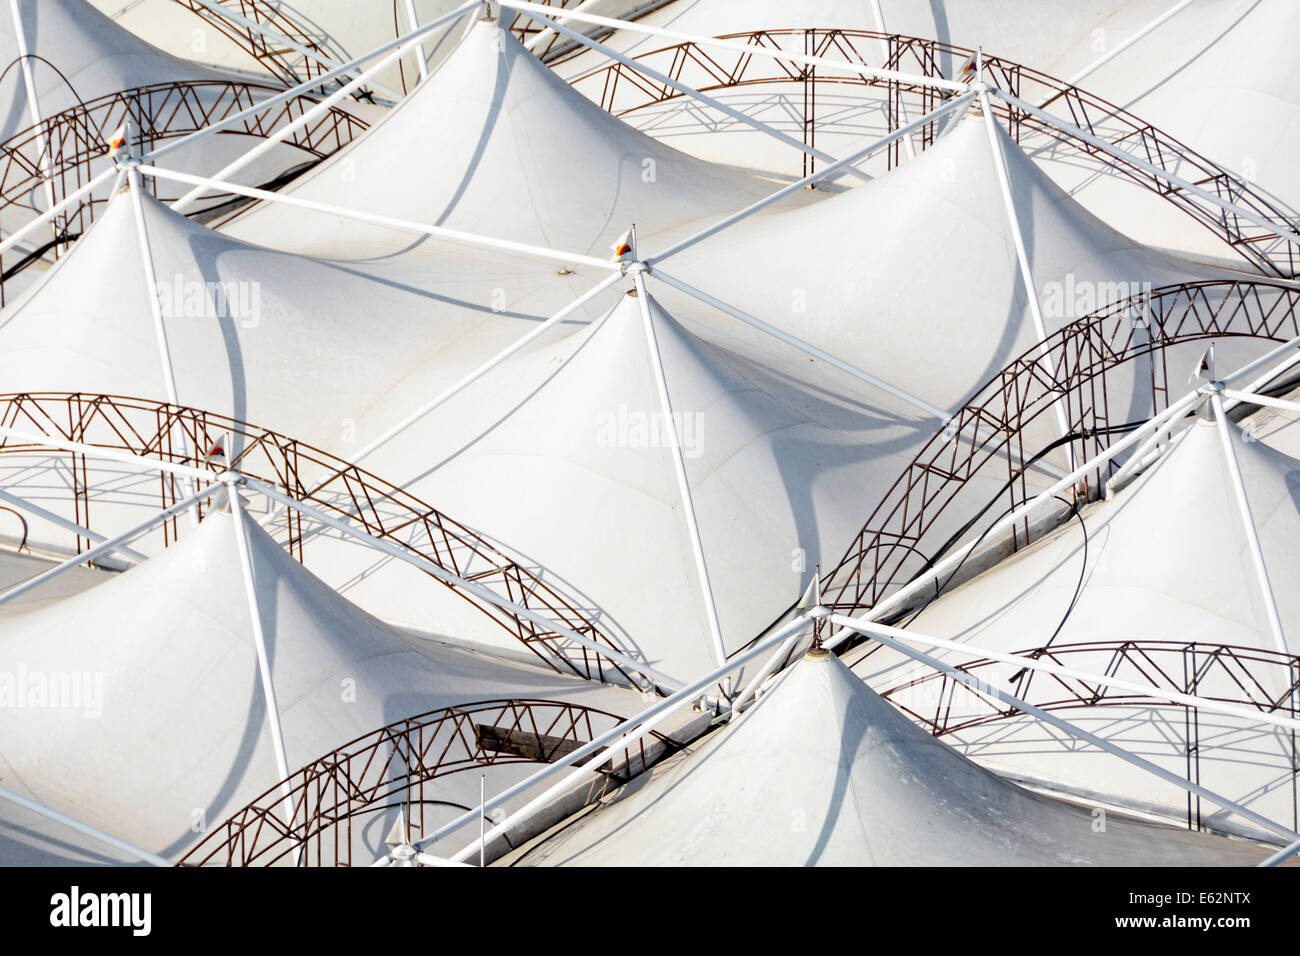 Aerial view from above looking down from above at  abstract patterns of roof panels on a temporary pavilion marquee type structure Bari Puglia Italy Stock Photo